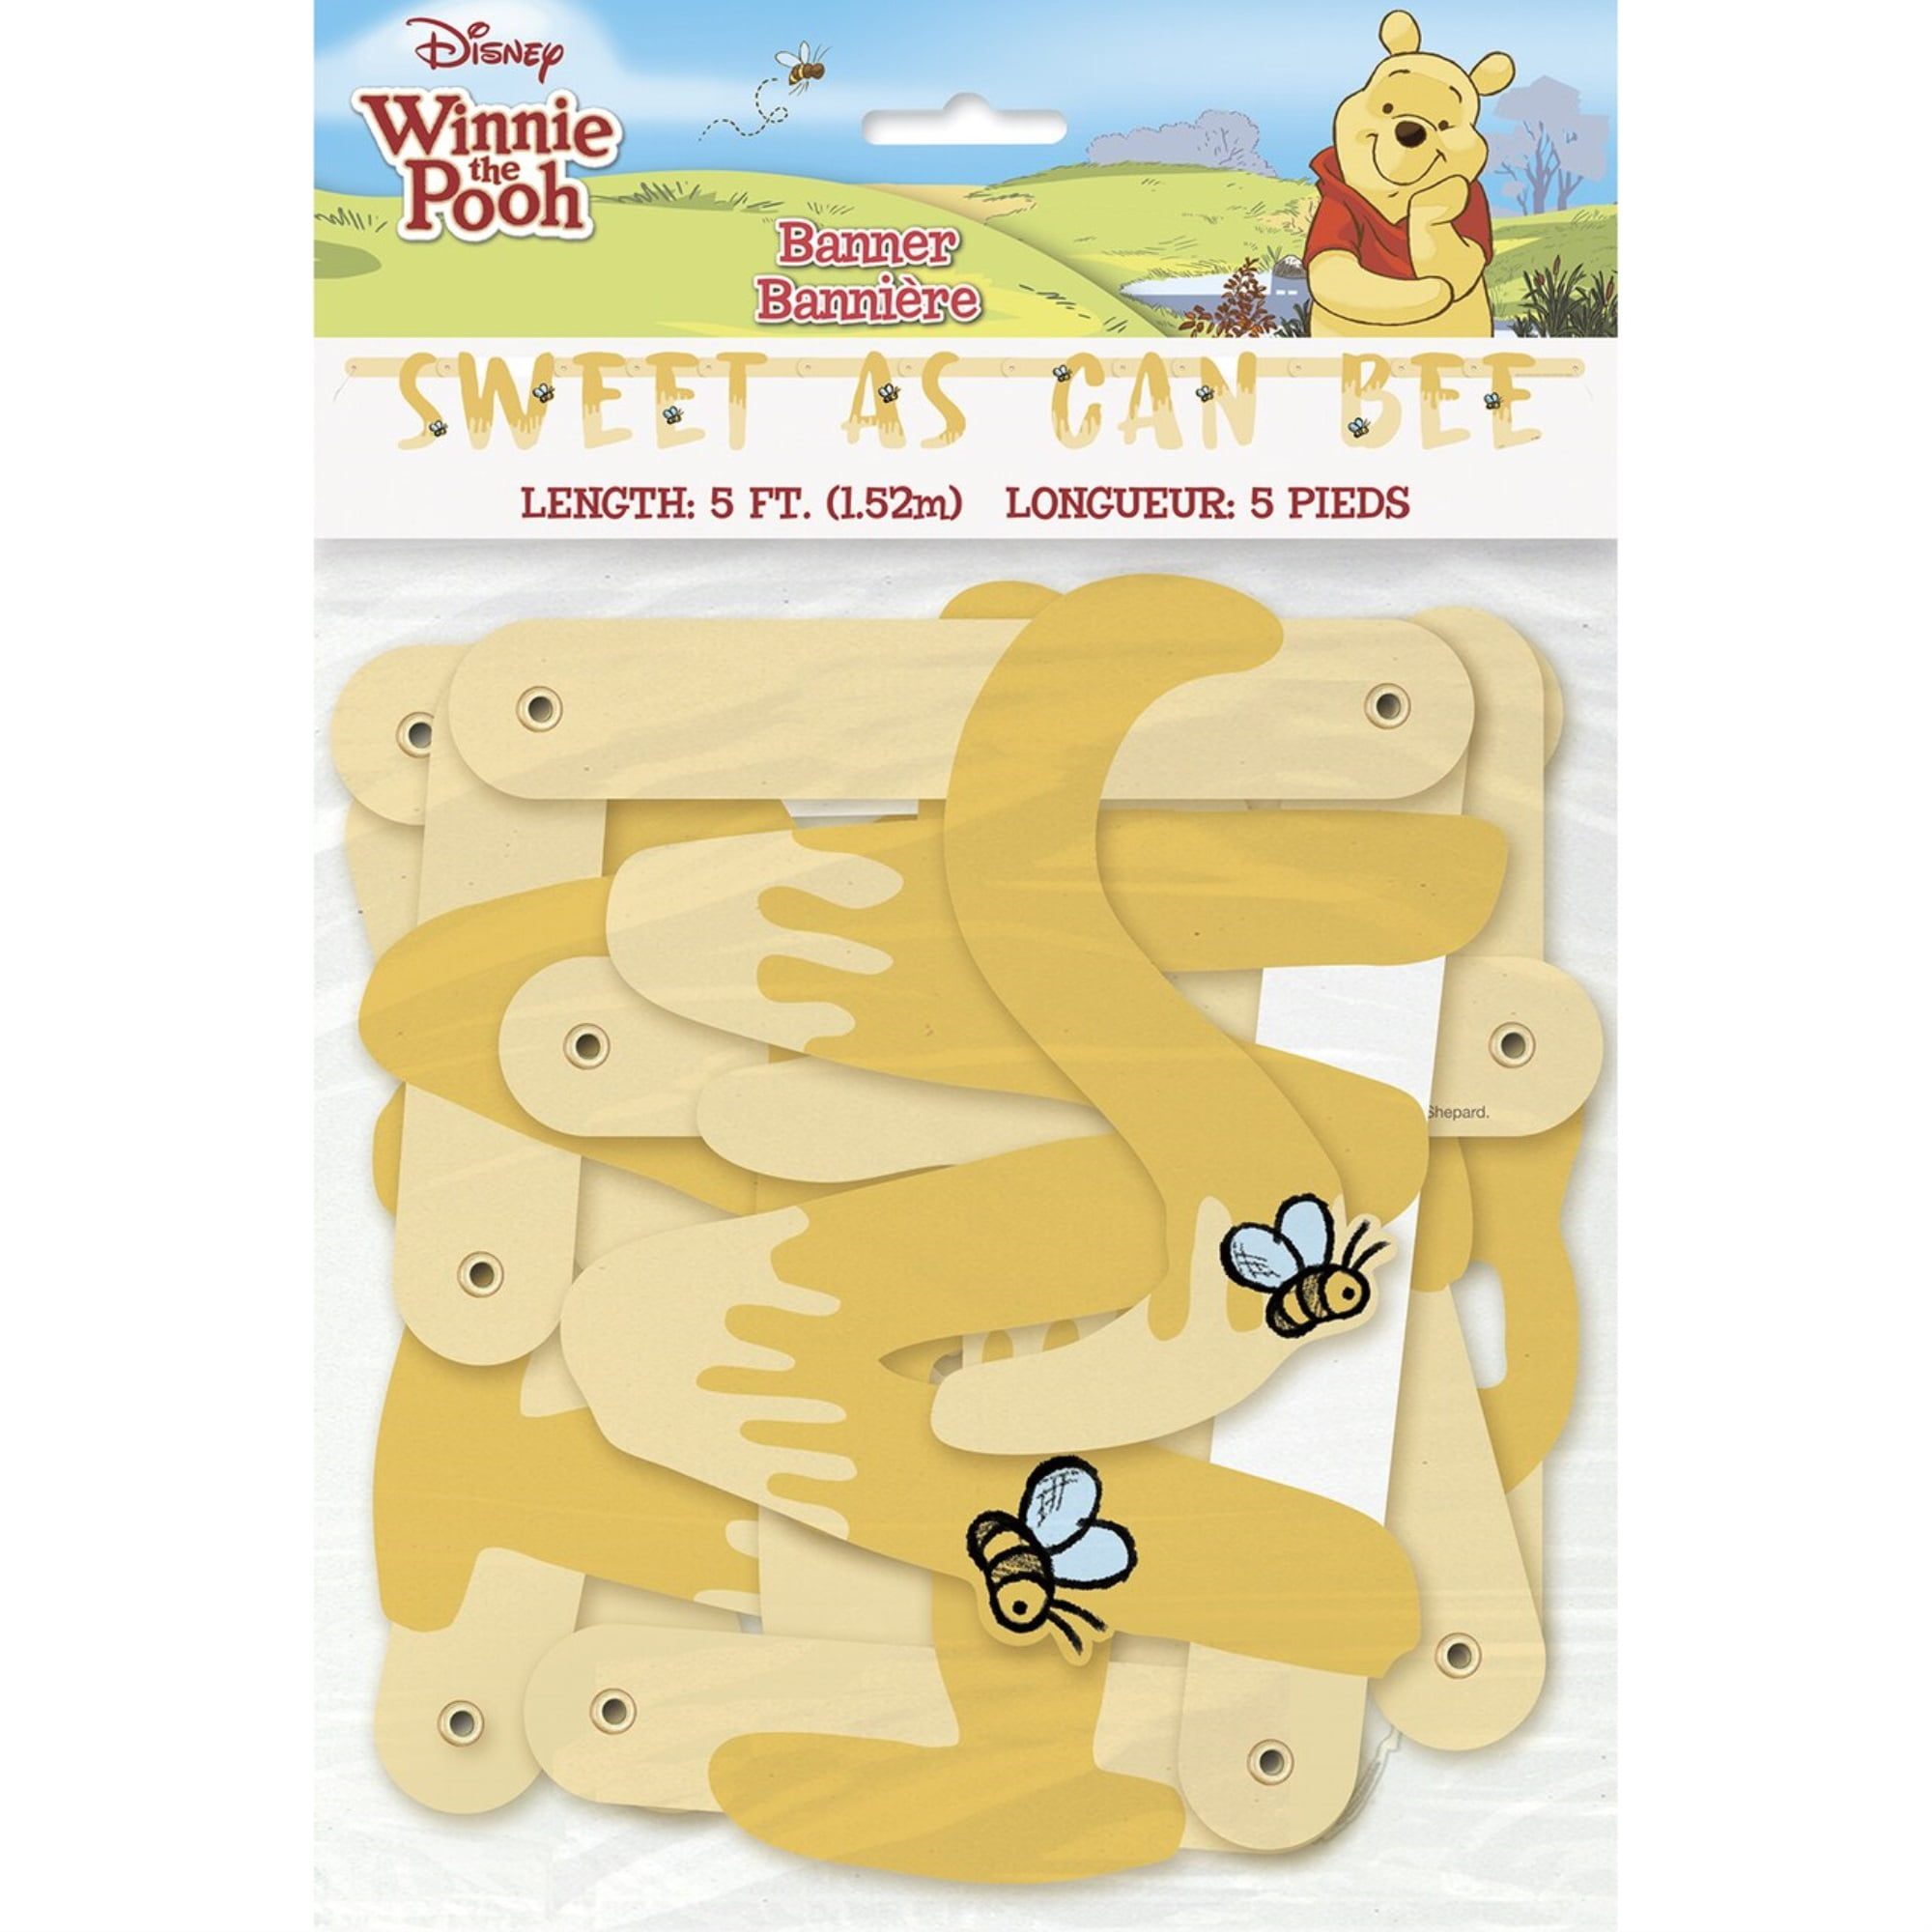 NEW WINNIE THE POOH DISNEY 16 DESSERT POOH AND PALS NAPKINS  PARTY SUPPLIES 